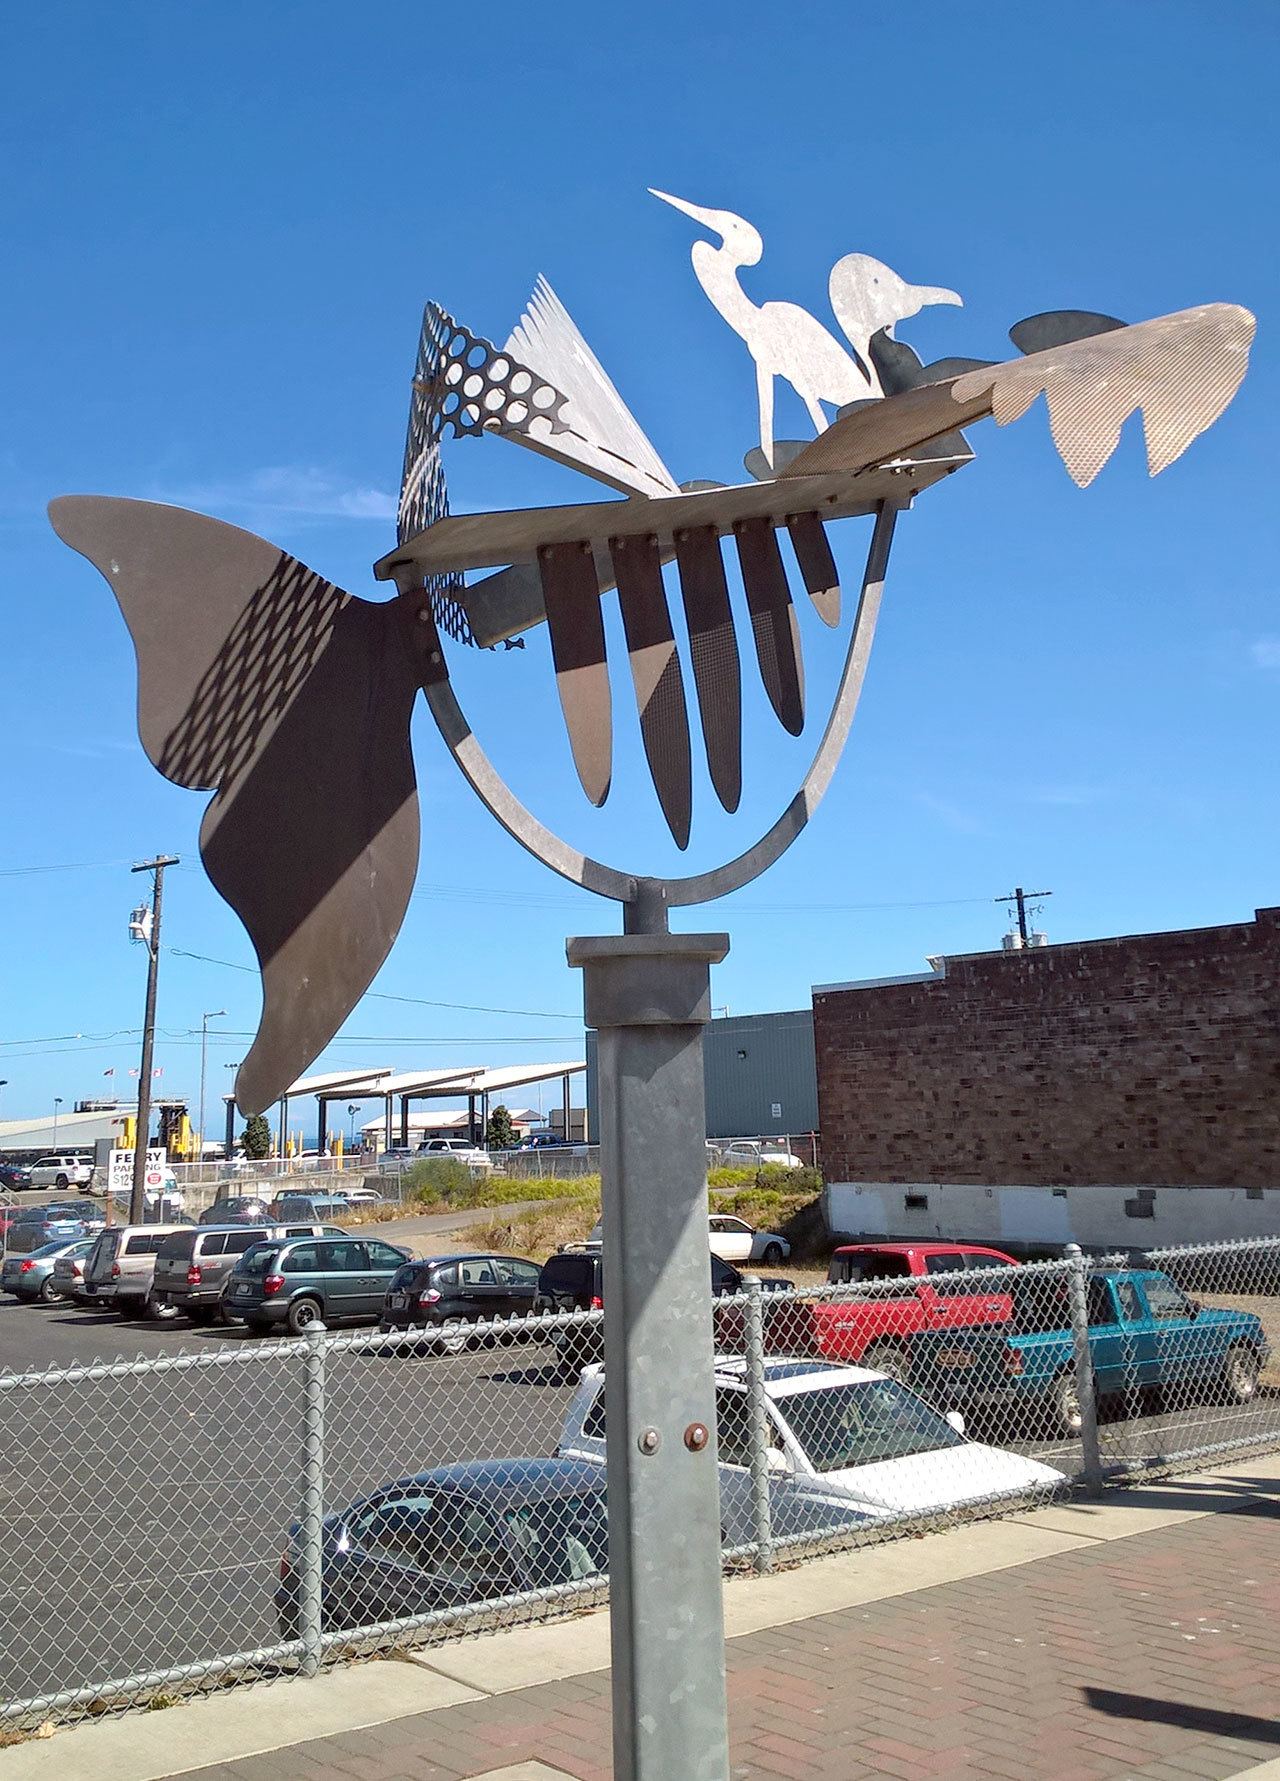 The Port Angeles Downtown Association is raising money to purchase a kinetic sculpture by Seattle artist Shawn Johnson, “Birds of a Feather,” so it can be permanently displayed on Front Street in Port Angeles. (Richard Stephens)